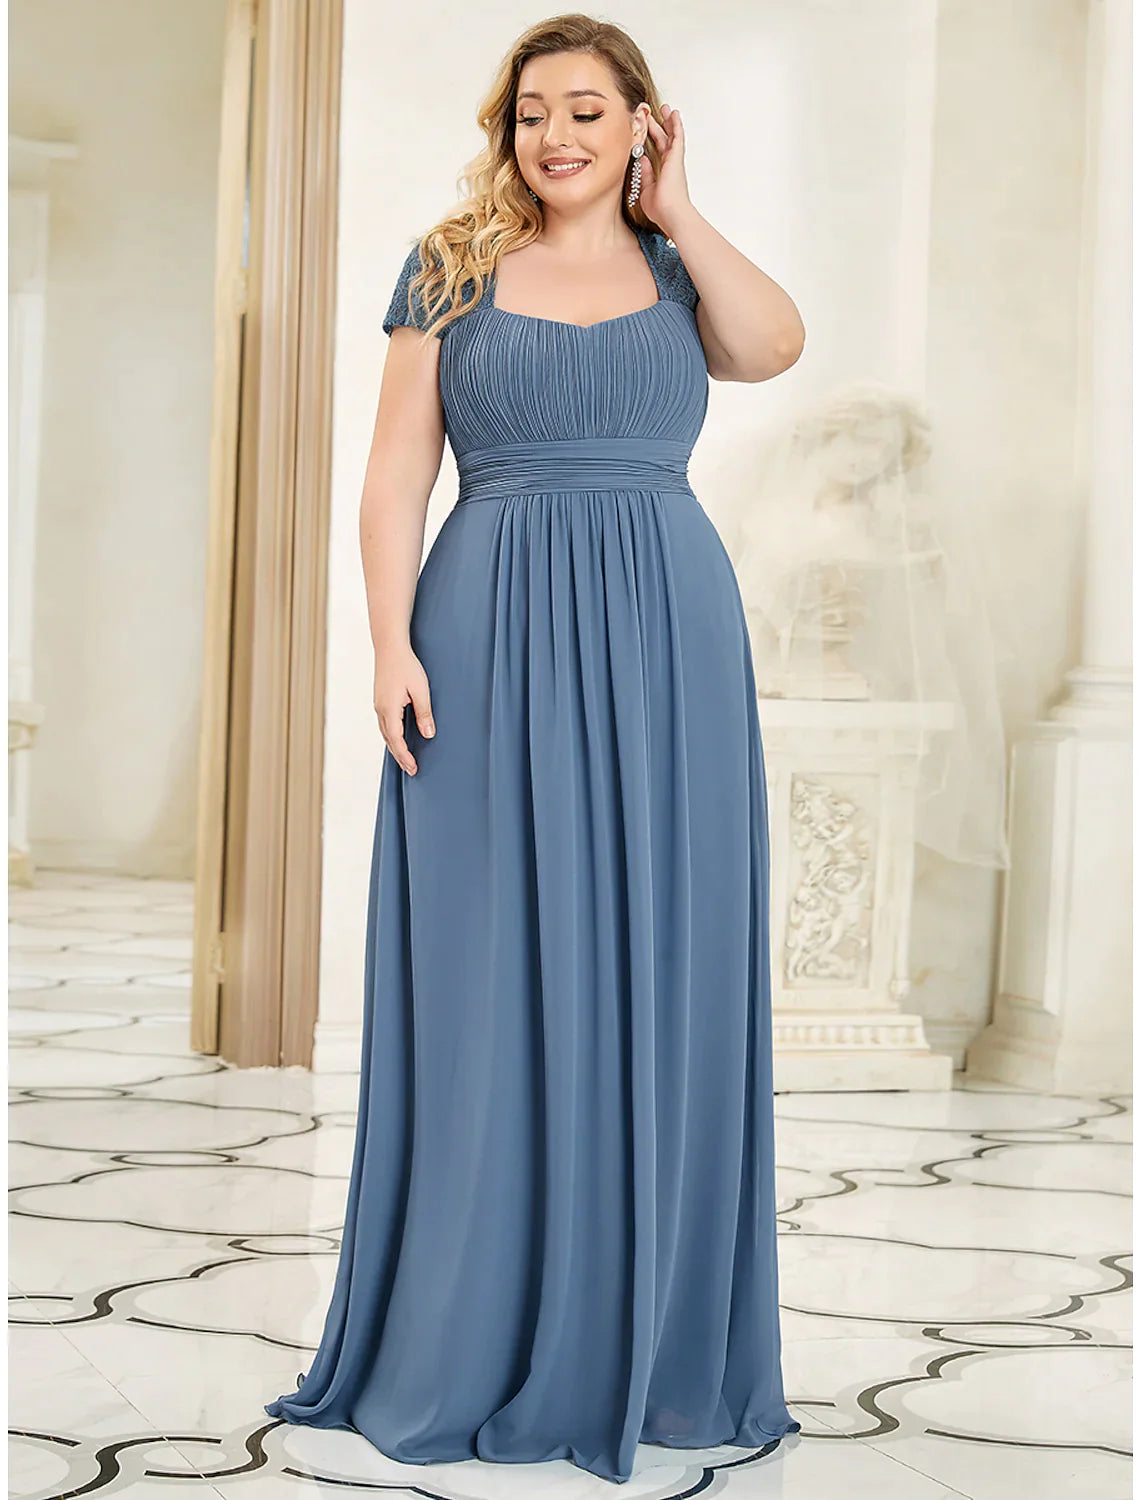 A-Line Evening Gown Plus Size Dress Wedding Guest Floor Length Short Sleeve Chiffon with Ruched